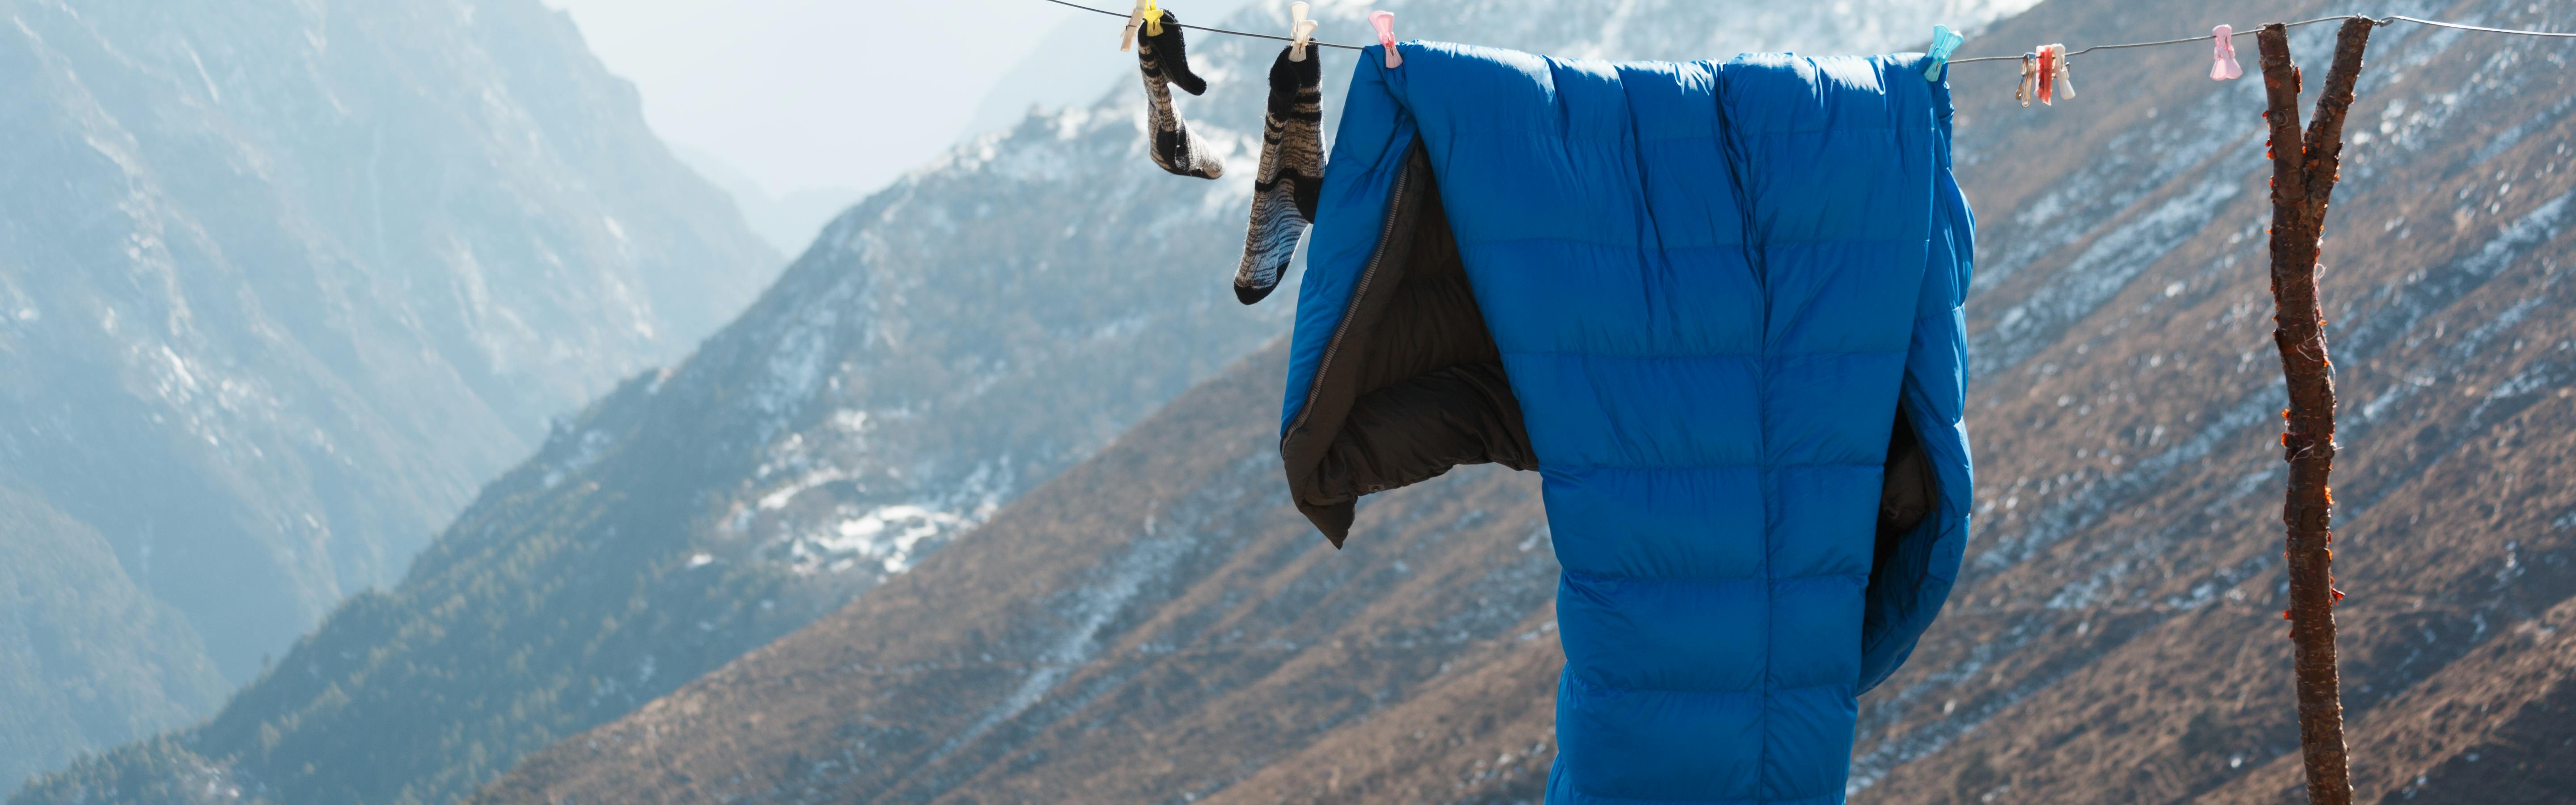 A sleeping bag hanging on a drying like with mountains in the background. 